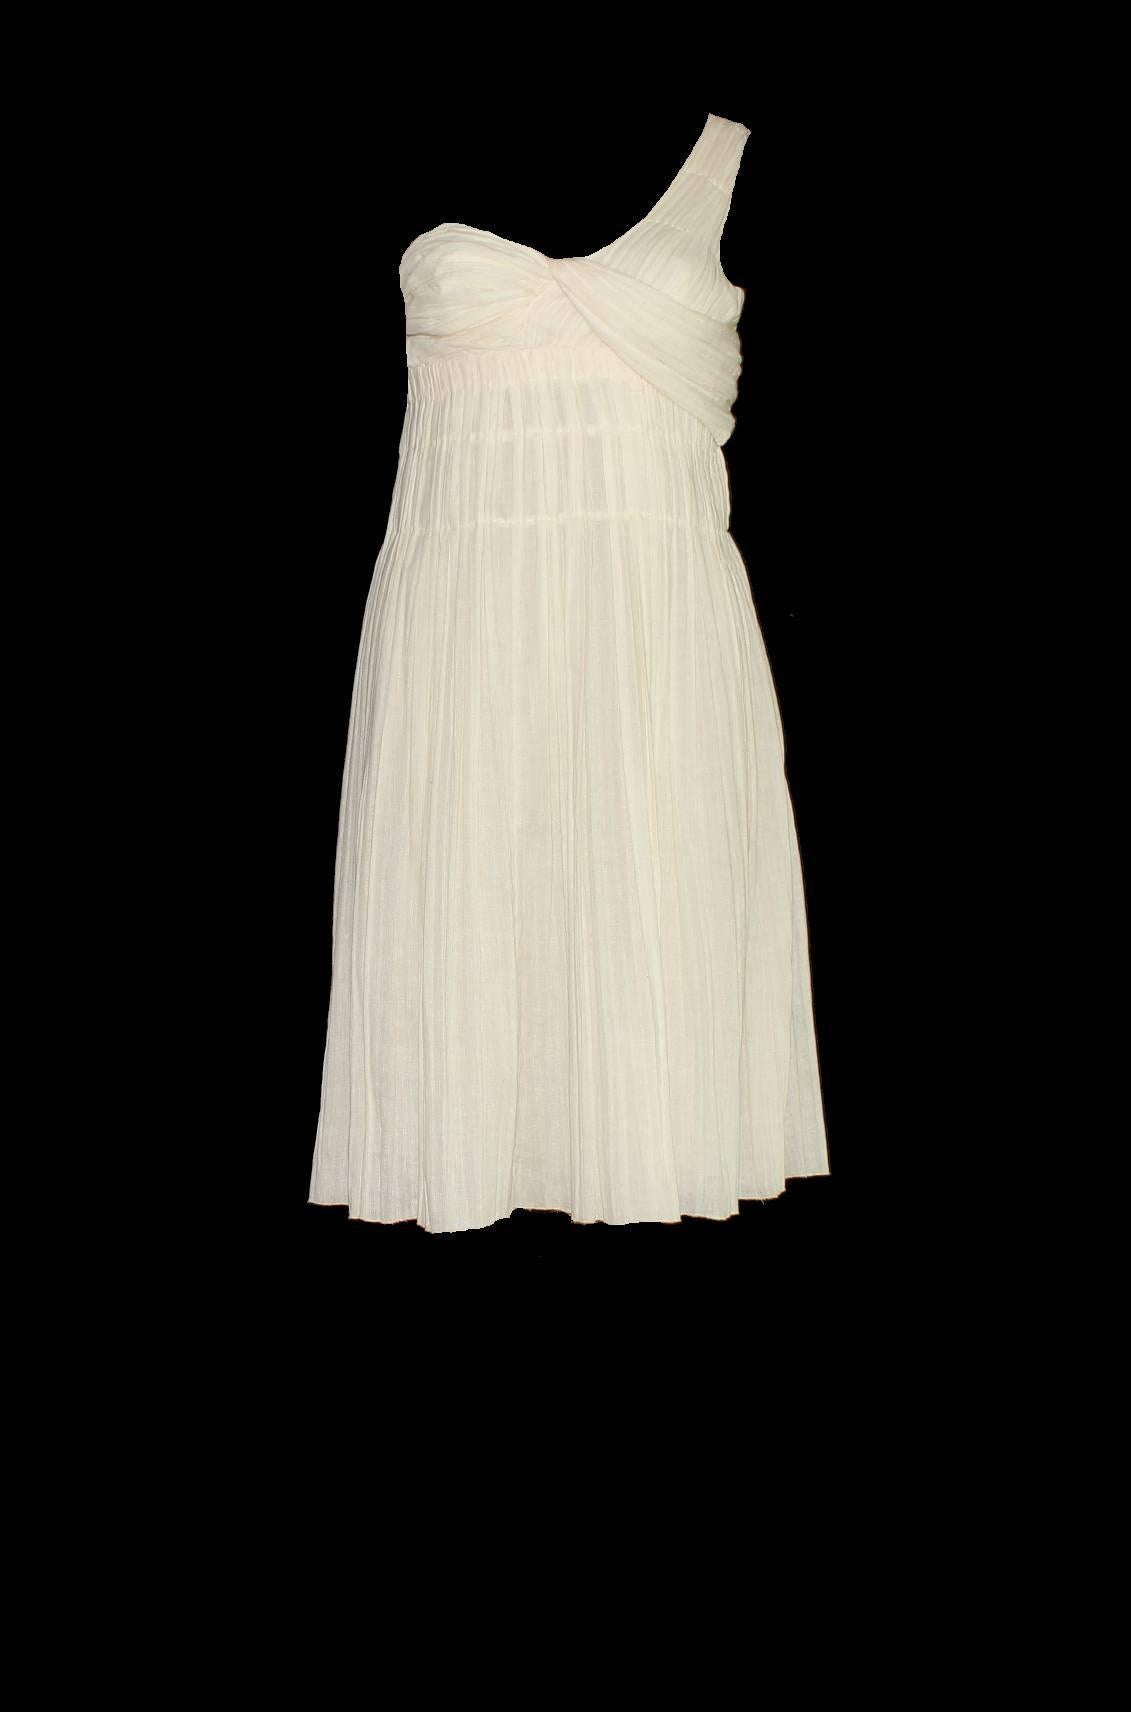 MIUCCIA PRADA

OFF-WHITE ASYMMETRICAL GRECIAN GODDESS DRAPED PLEAT DRESS

A CLASSIC PRADA PIECE THAT WILL LAST YOU FOR YEARS

PERFECT FOR THE SUMMER IN THE HAMPTONS

THE Prada dress worn by top model Anja Rubik, Carine Roitfeld and many